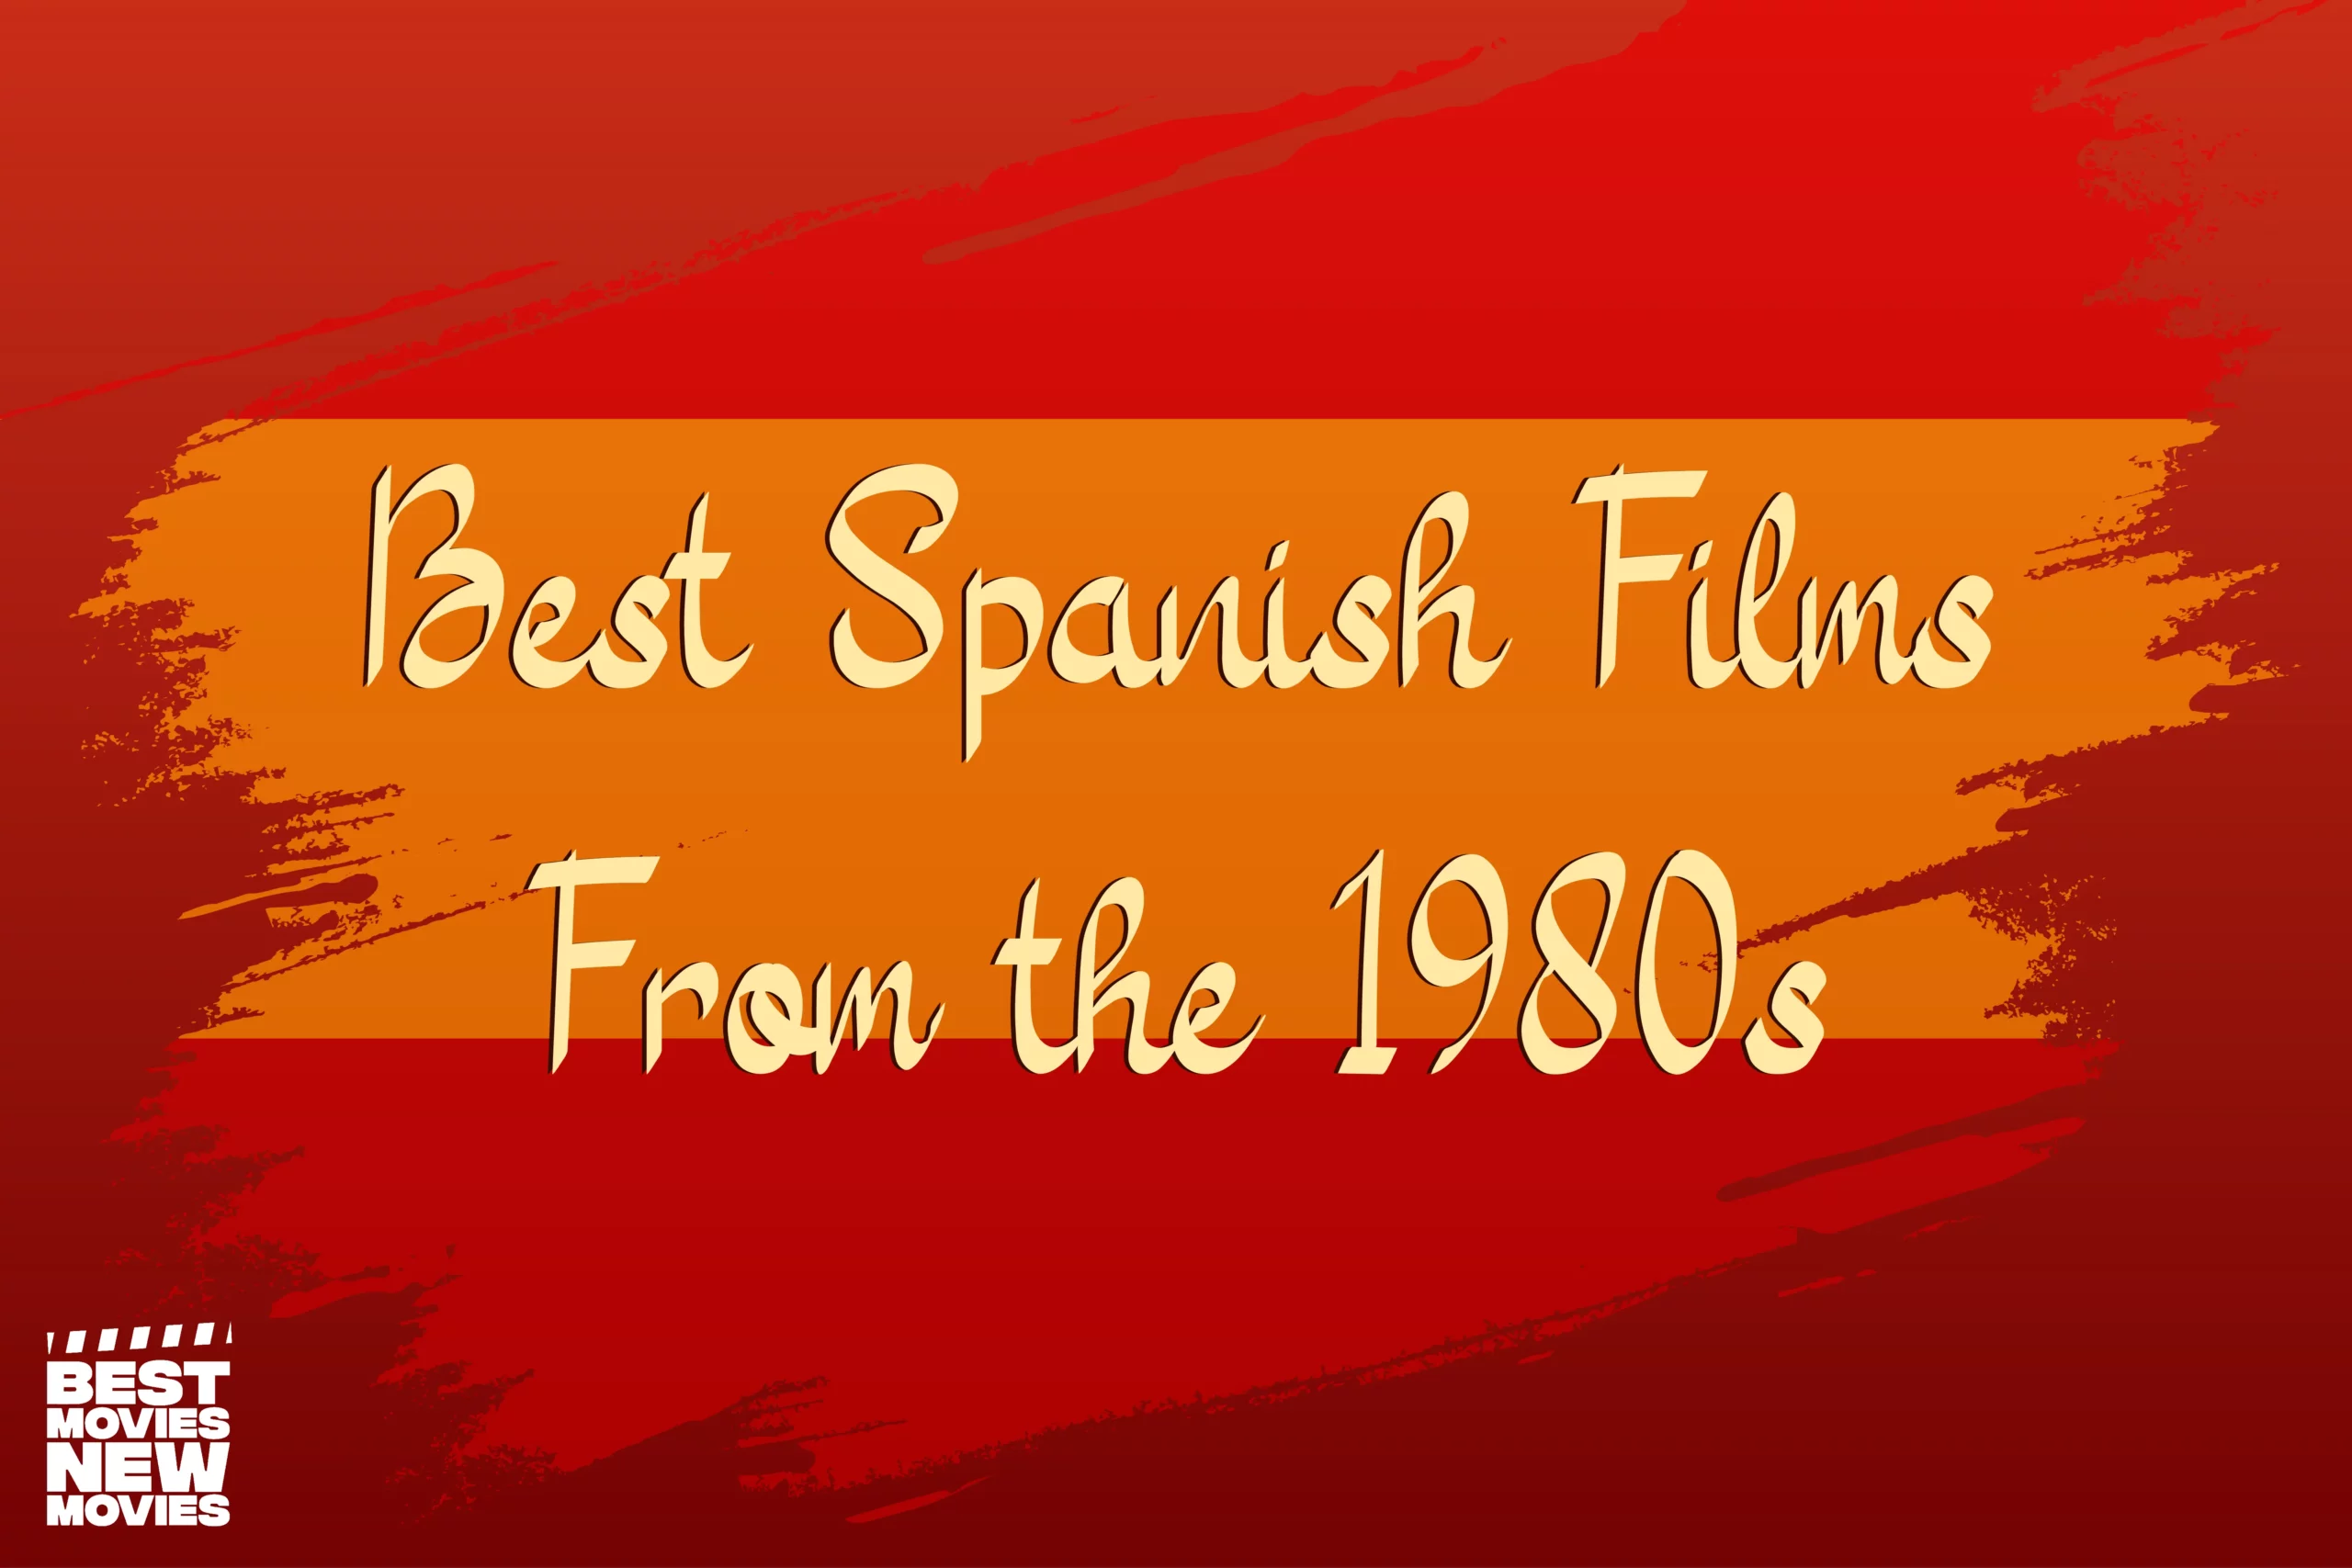 Best Spanish Films from the 1980s